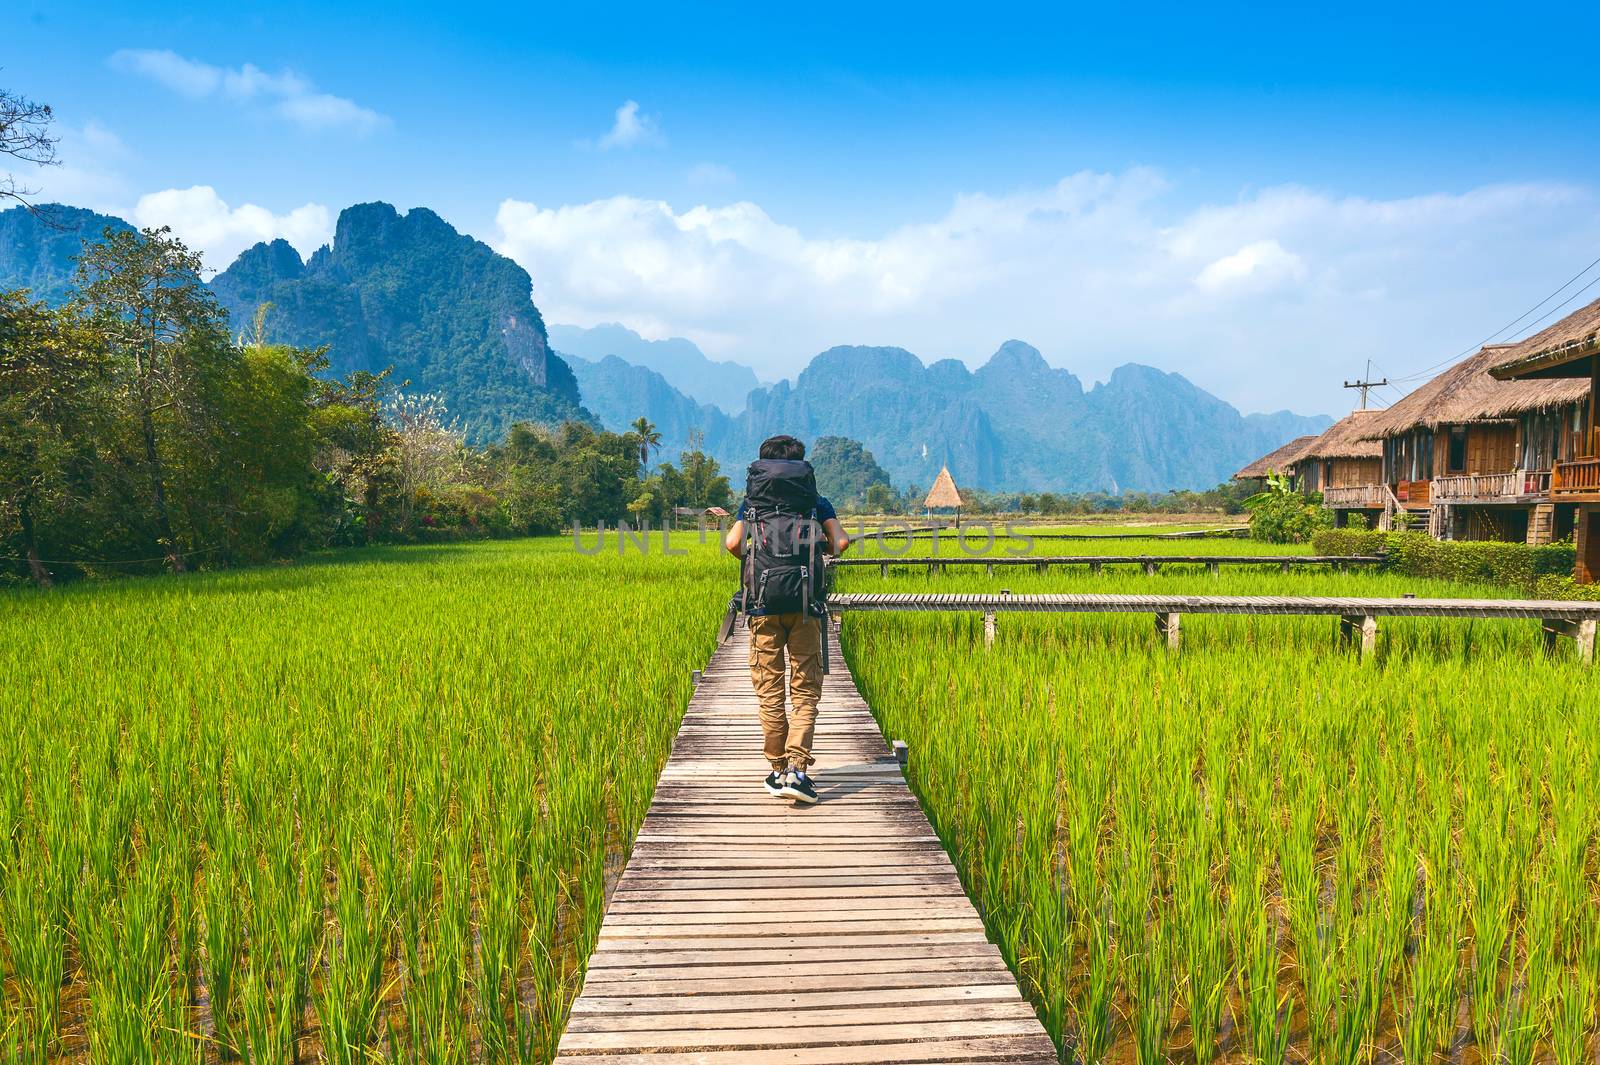 Tourism with backpack walking on wooden path, Vang vieng in Laos by gutarphotoghaphy